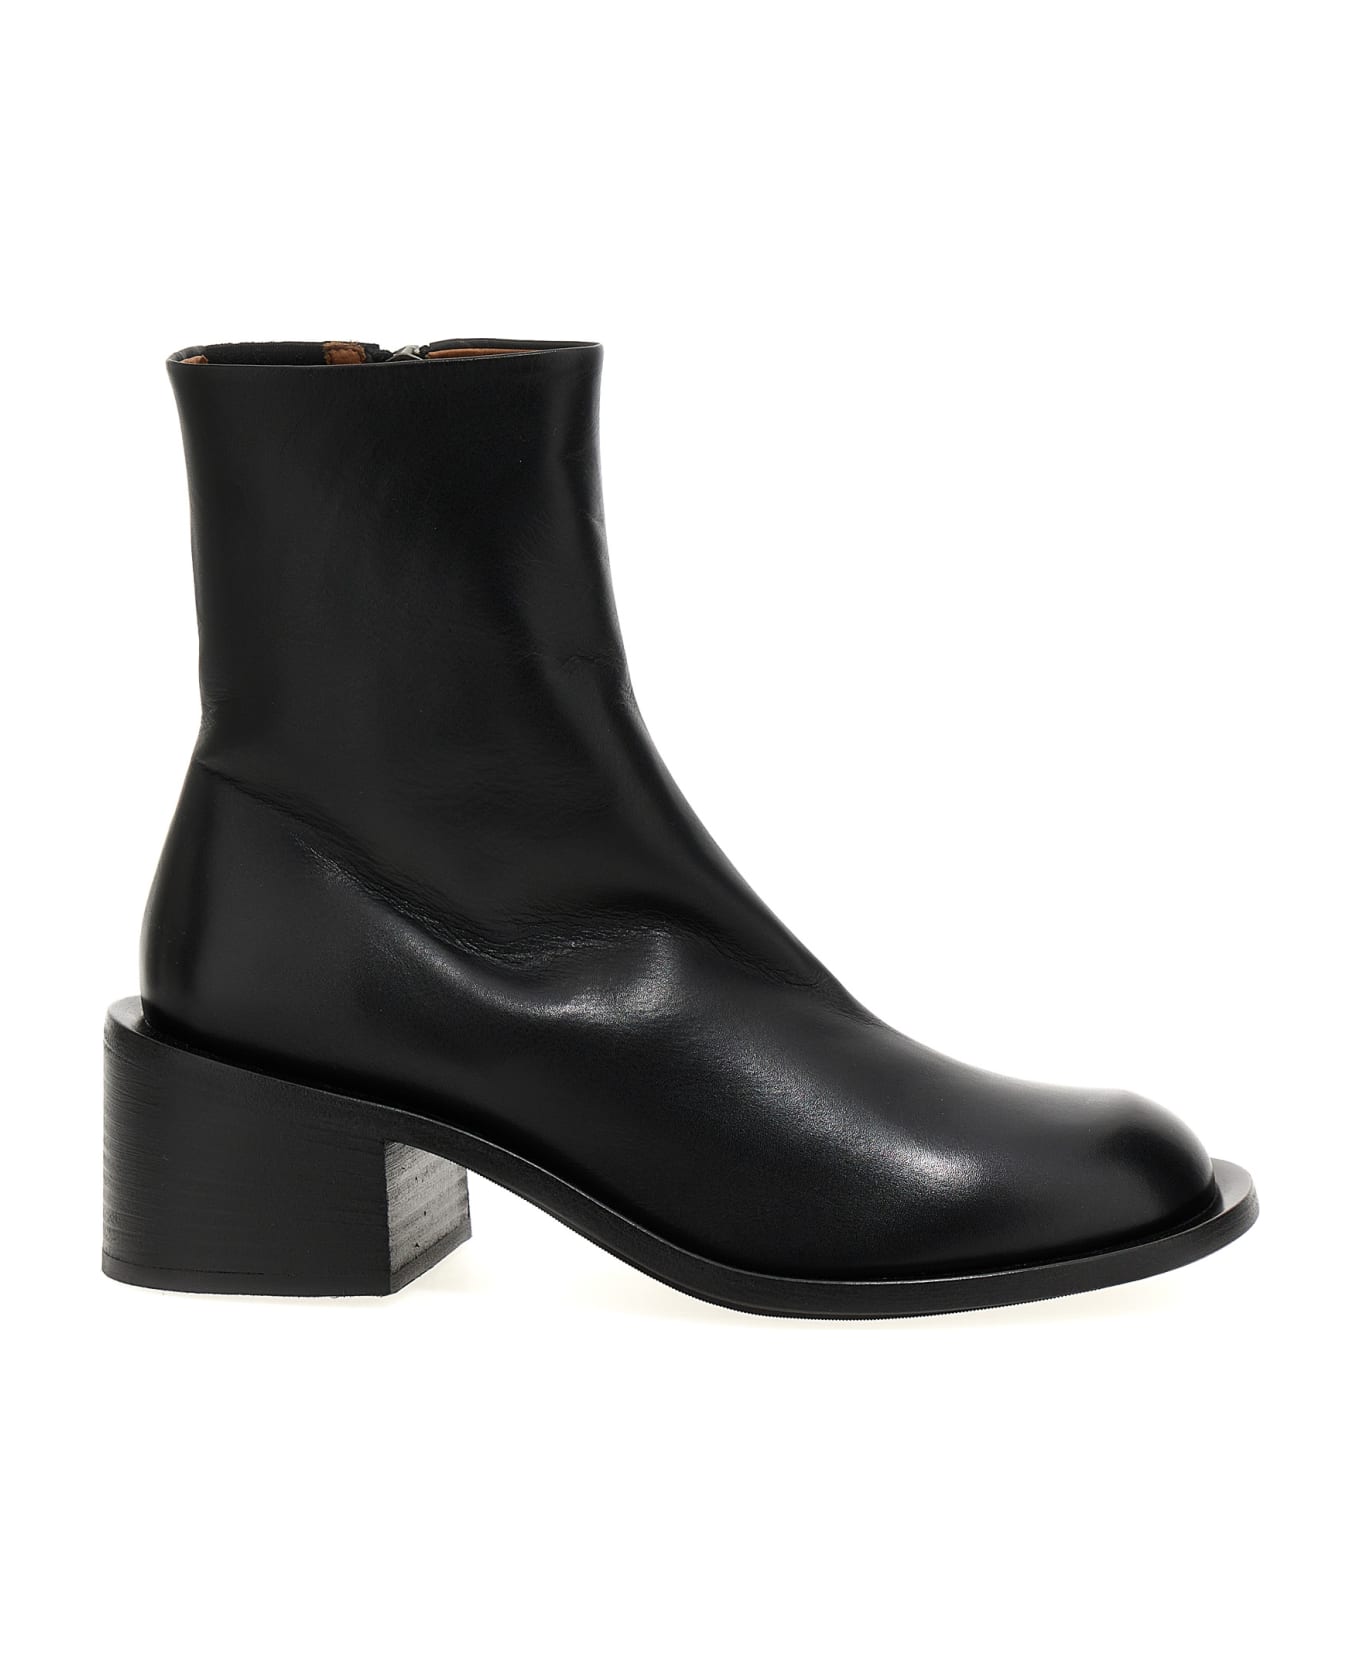 Marsell 'allucino' Ankle Boots - Black  